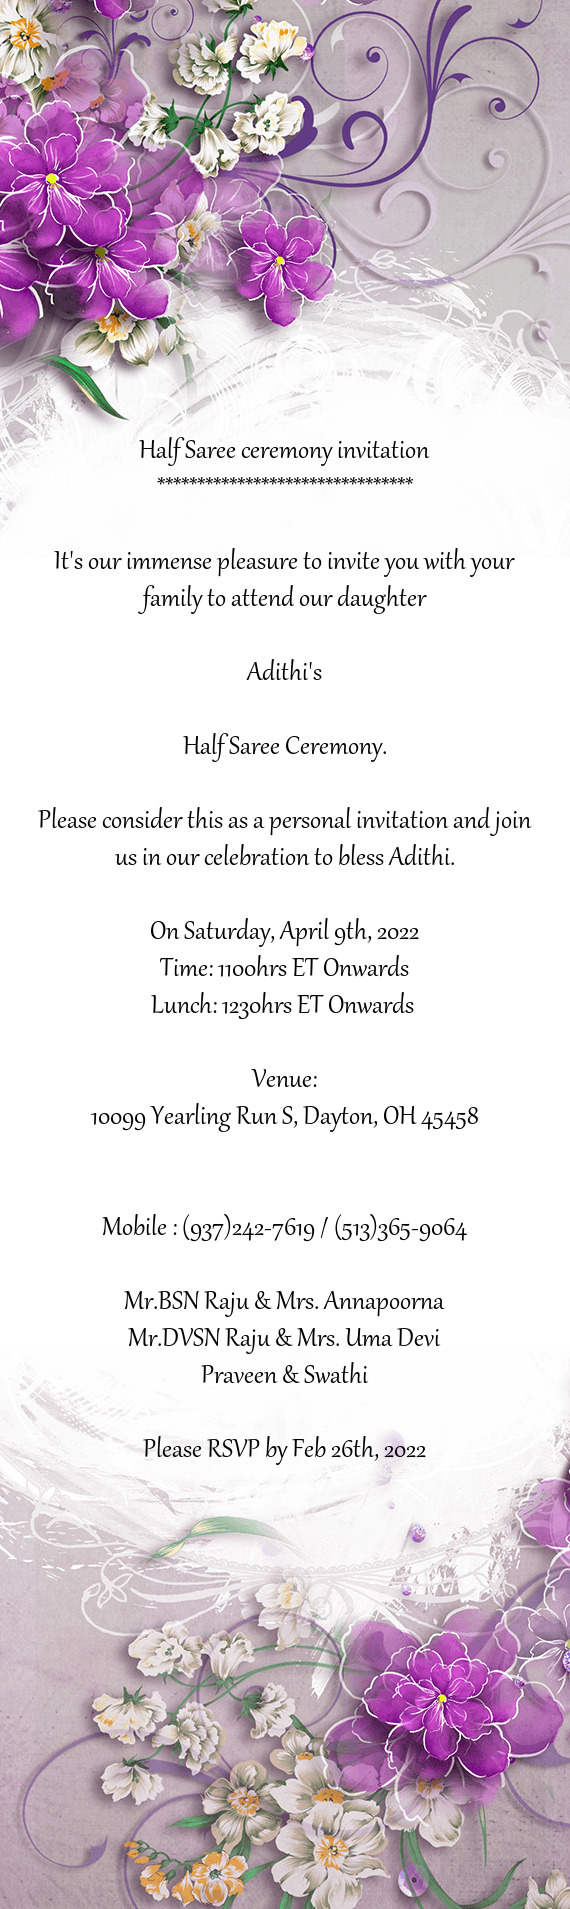 Please consider this as a personal invitation and join us in our celebration to bless Adithi